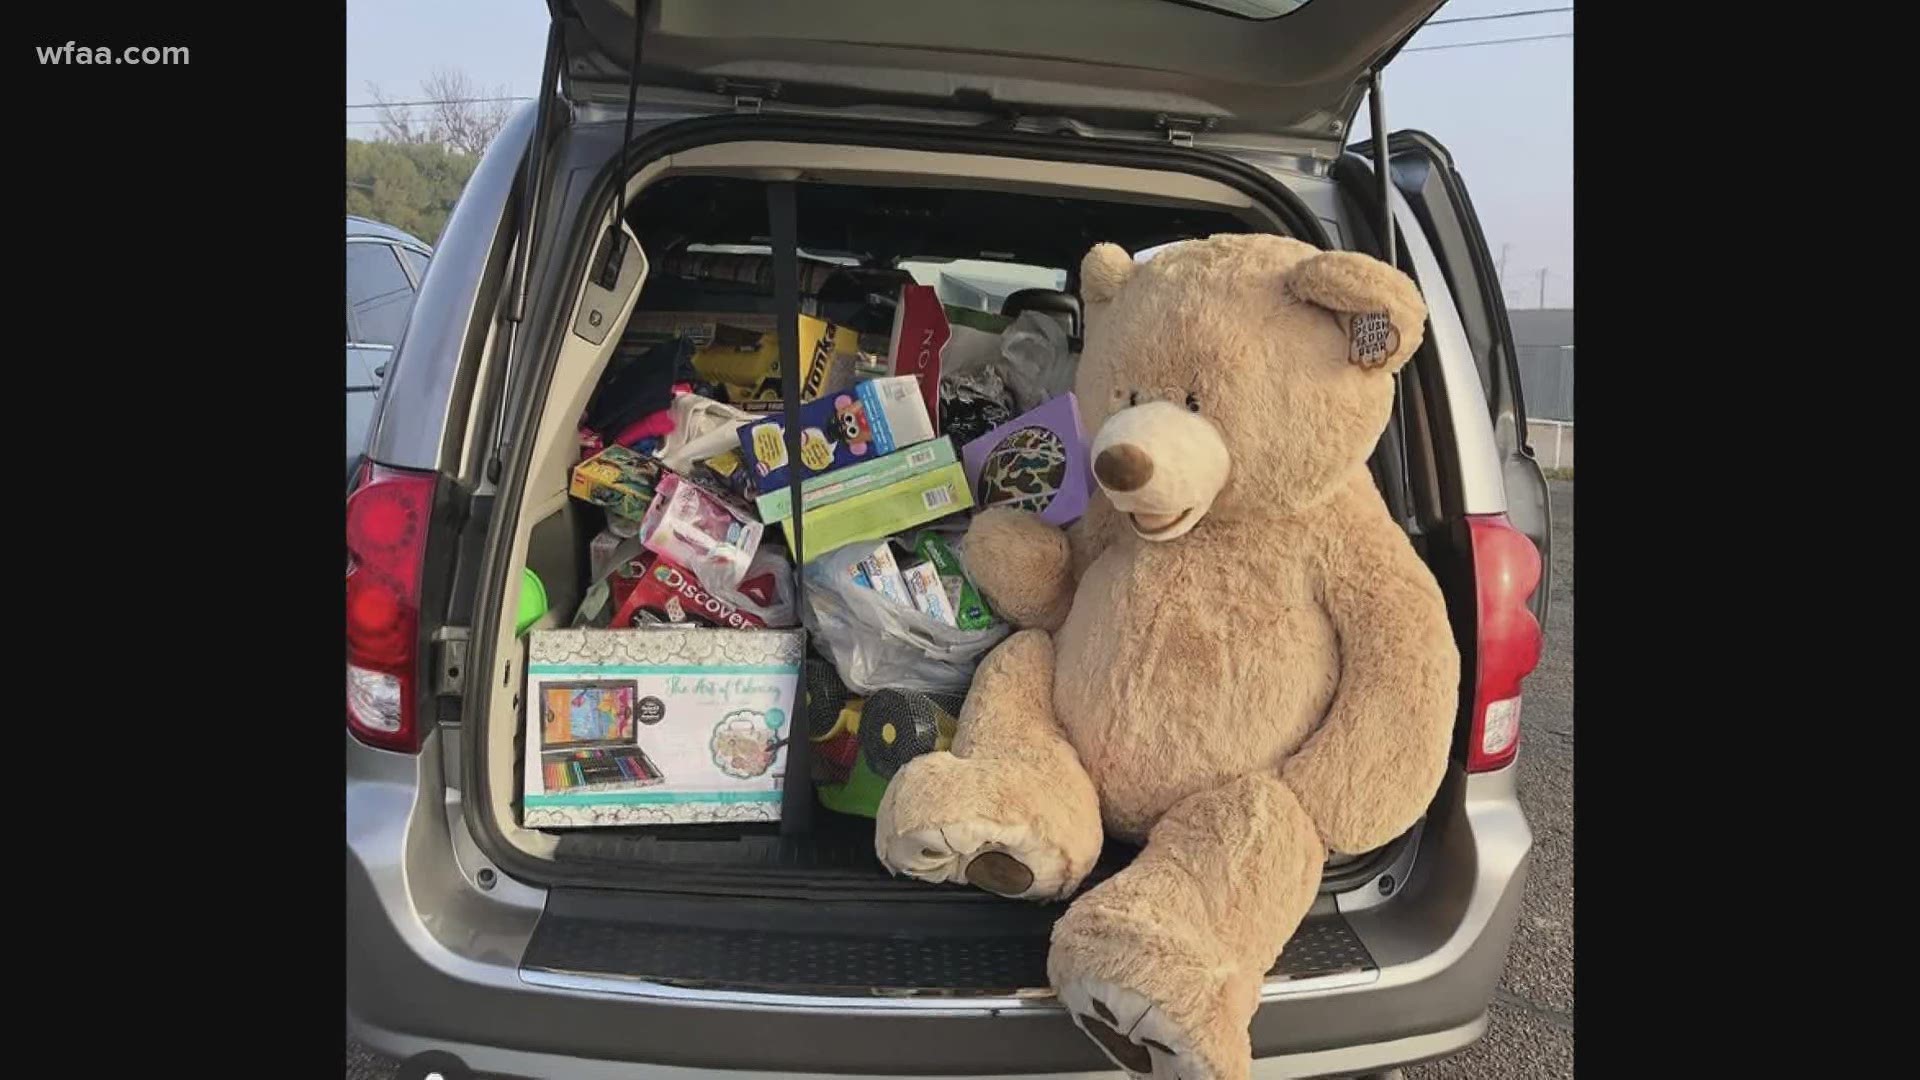 "Toys and hope for Marlin, Texas" is a toy drive for children in the small rural town of marlin, about 30 minutes outside Waco.